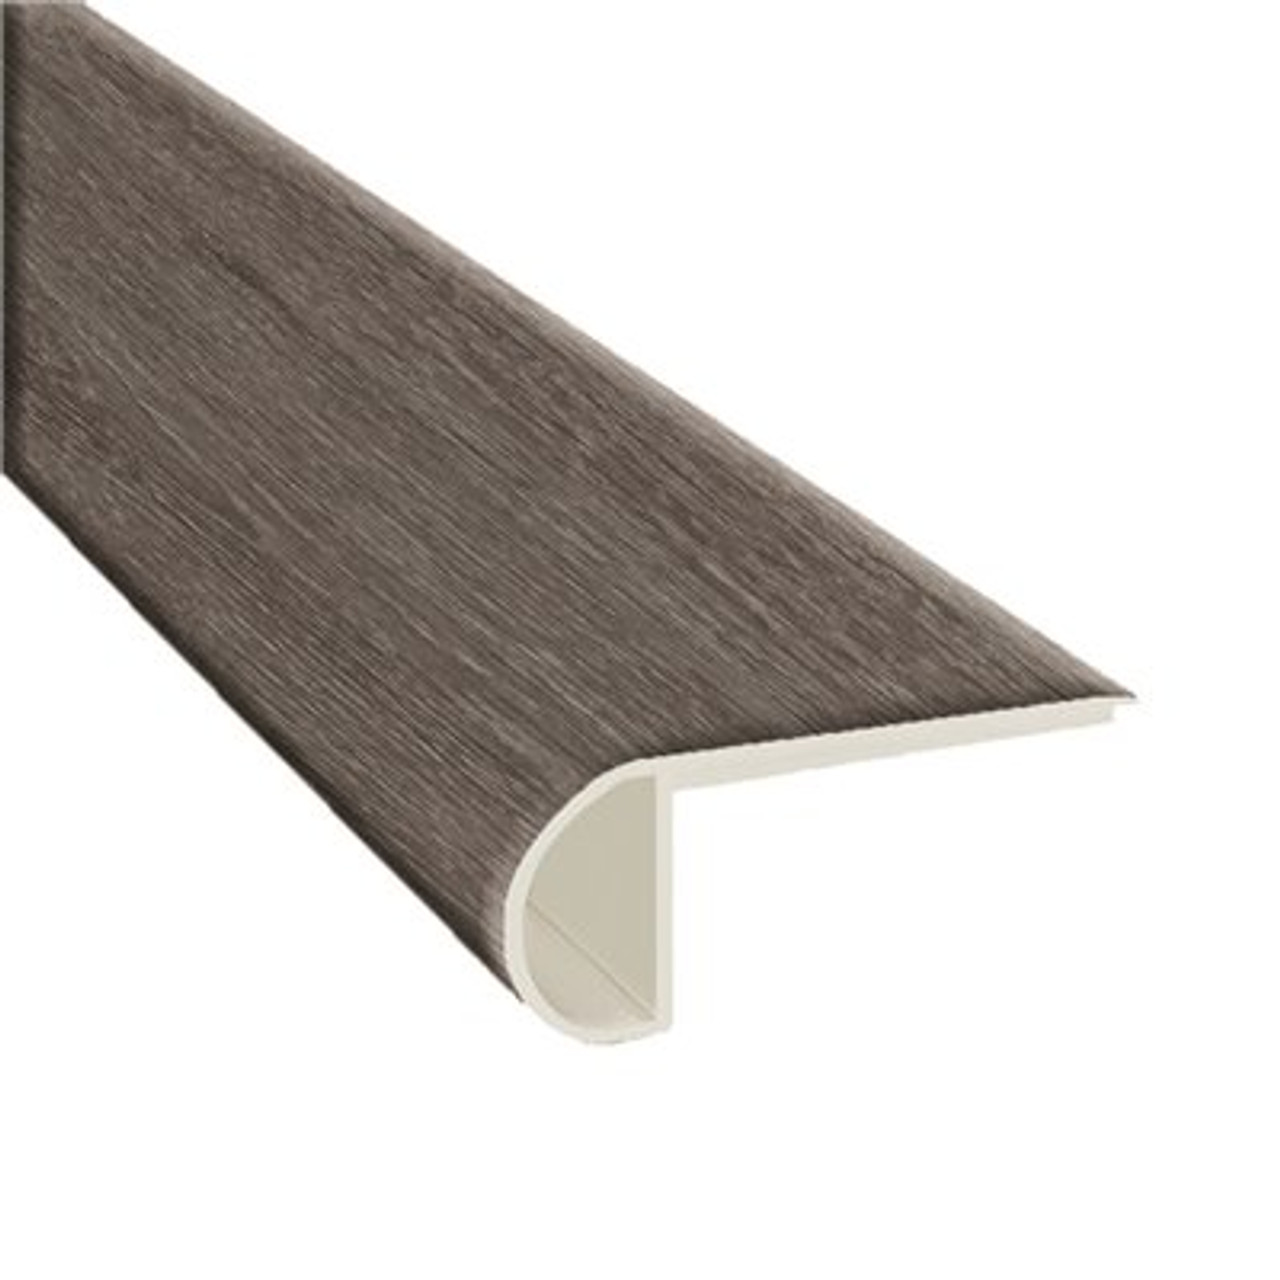 Msi Boca De Yuma-3/4 In. Thick X 2-3/4 In. Wide X 94 In. Length Luxury Vinyl Flush Stair Nose Molding